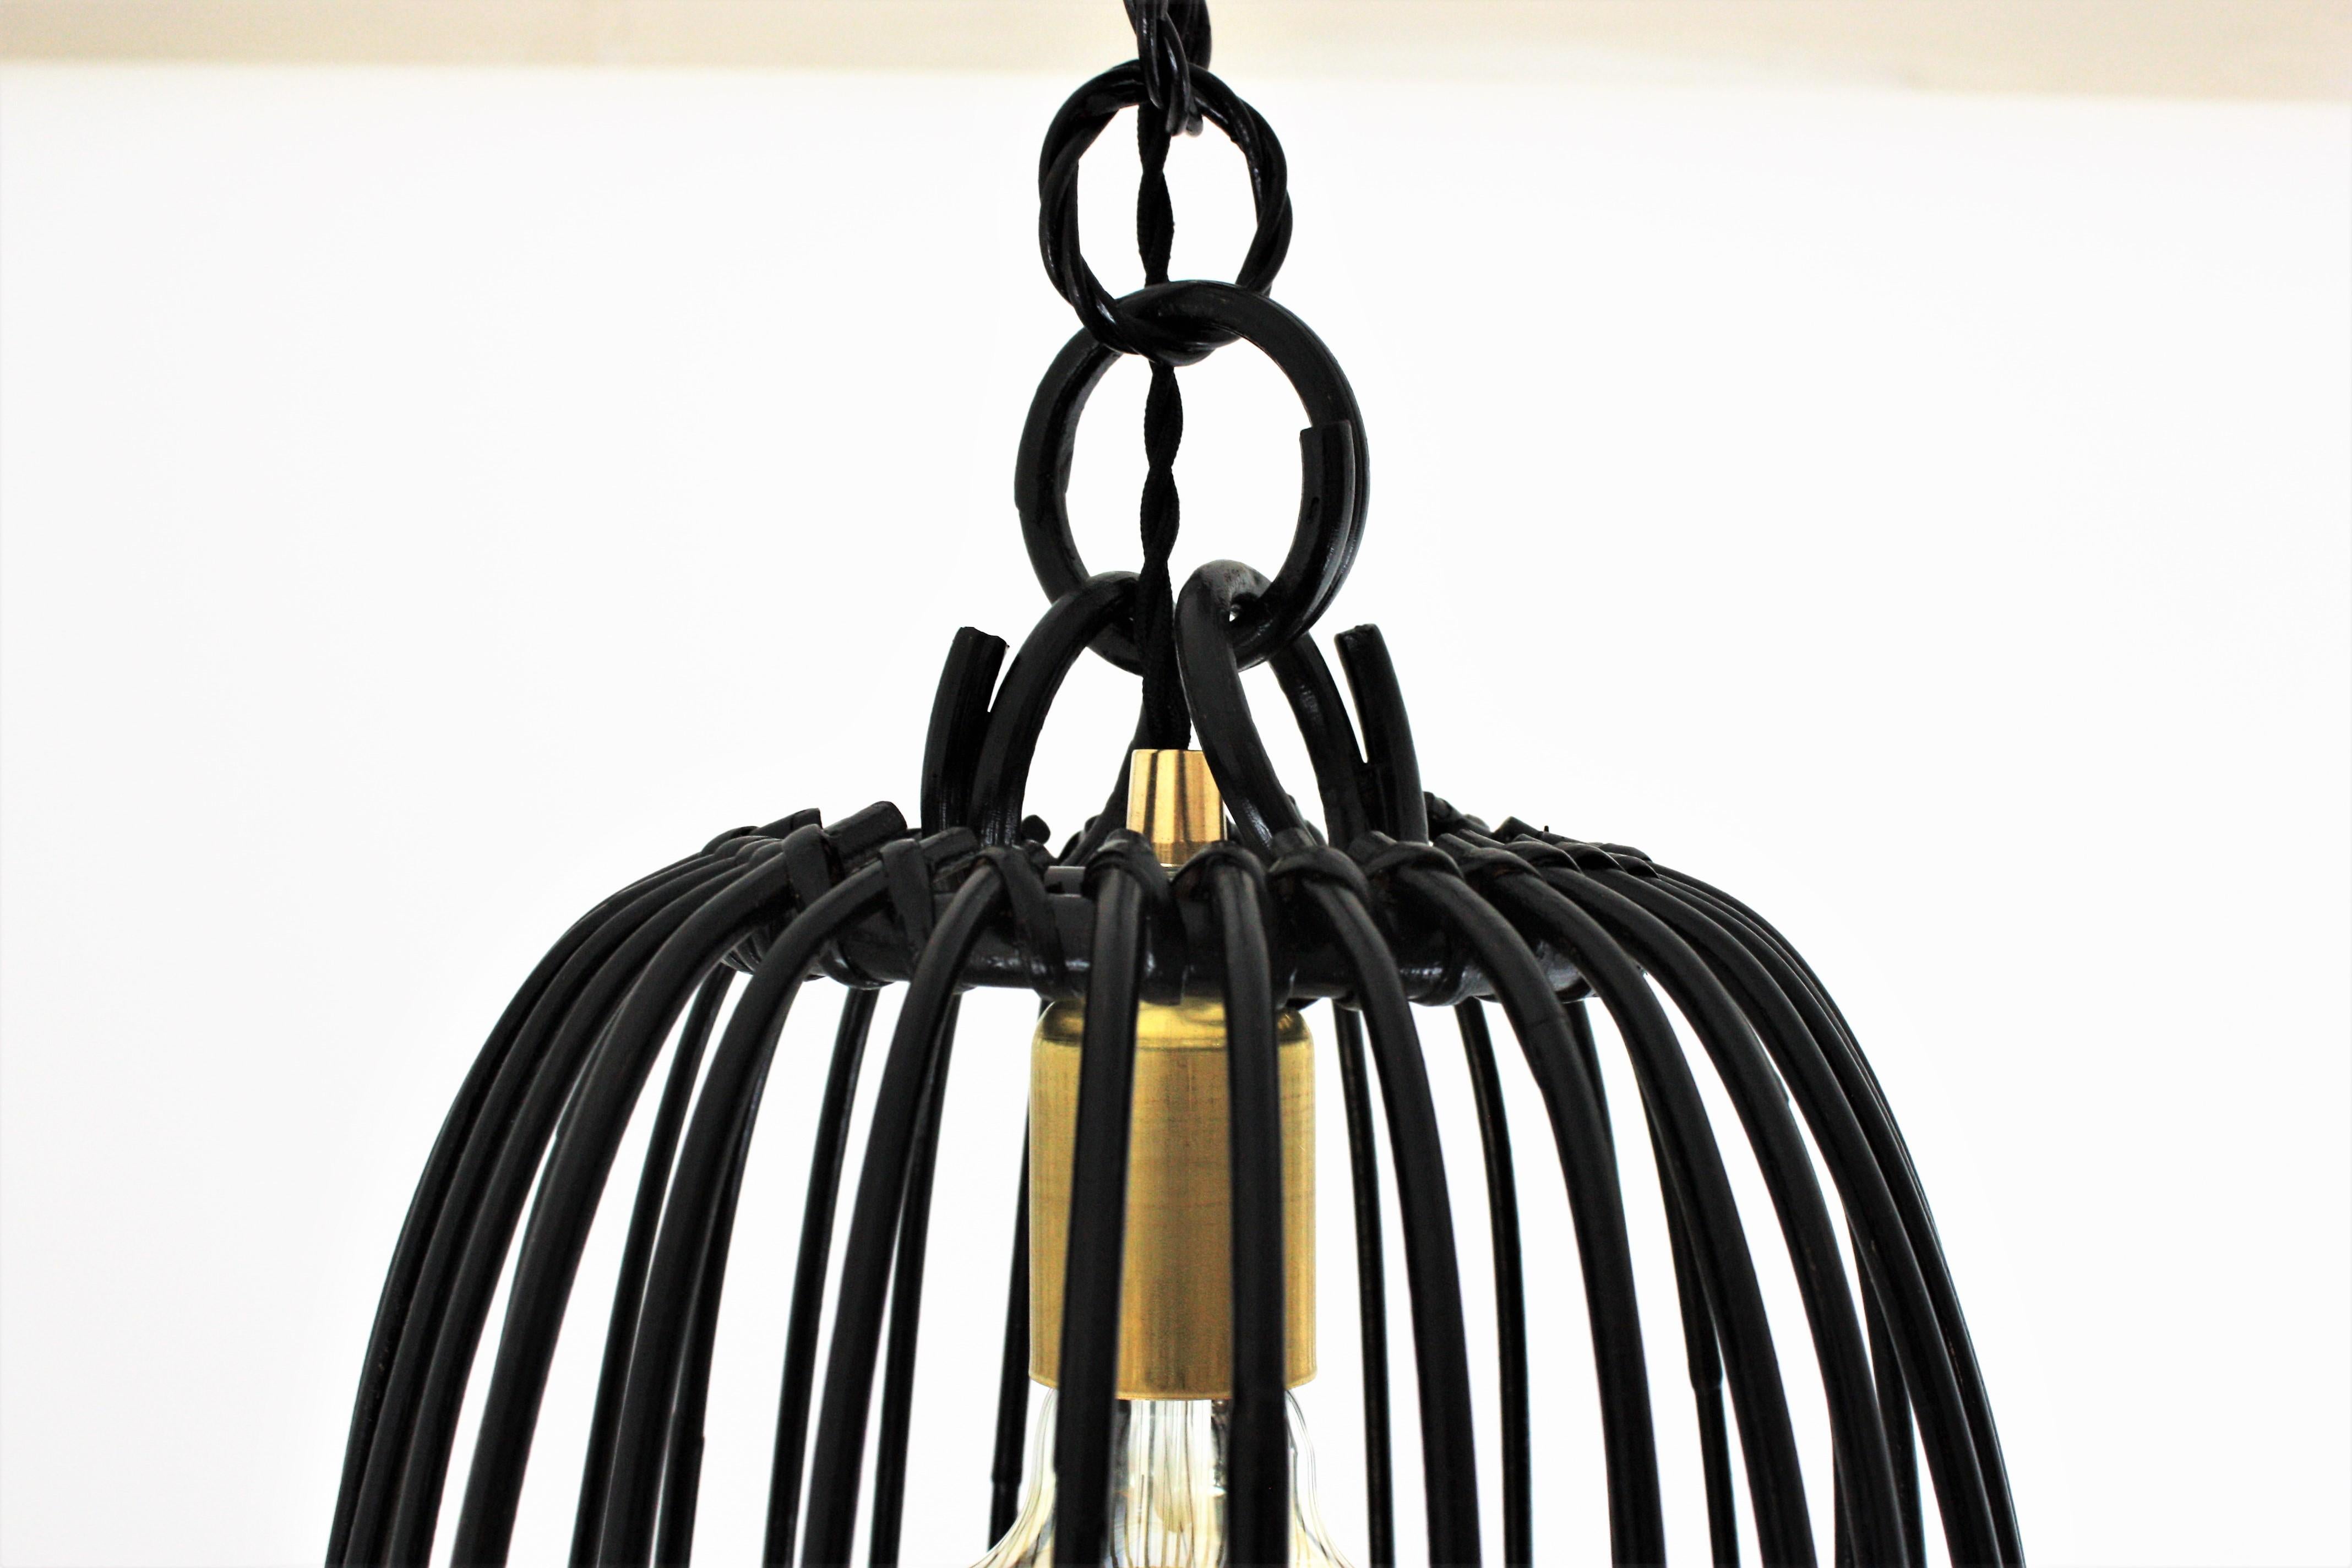 Rattan Bell Pendant or Hanging Light in Black Patina, Spain, 1960s For Sale 5